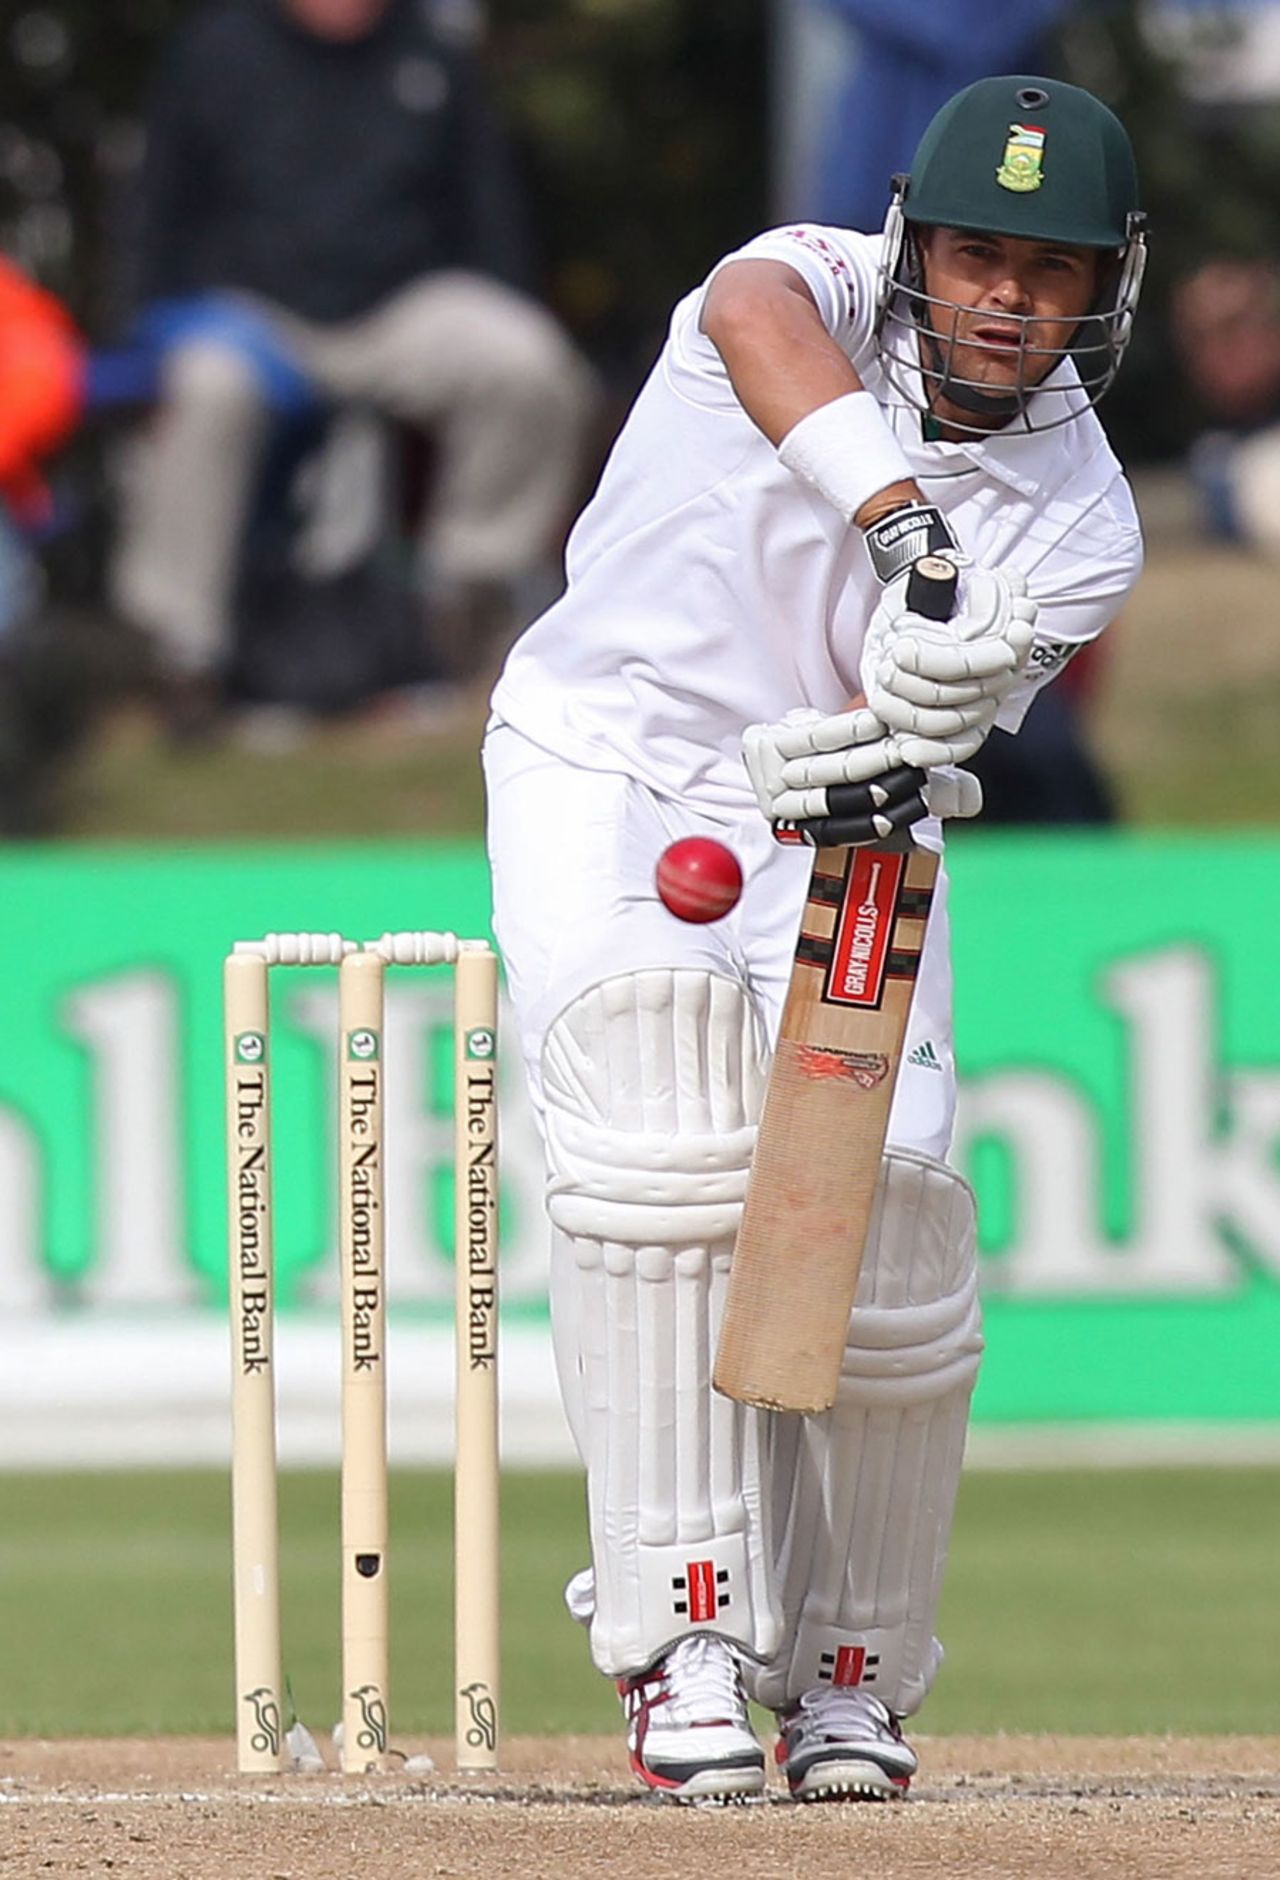 Jacques Rudolph defends with a straight bat, New Zealand v South Africa, 1st Test, Dunedin, 4th day, March 10, 2012